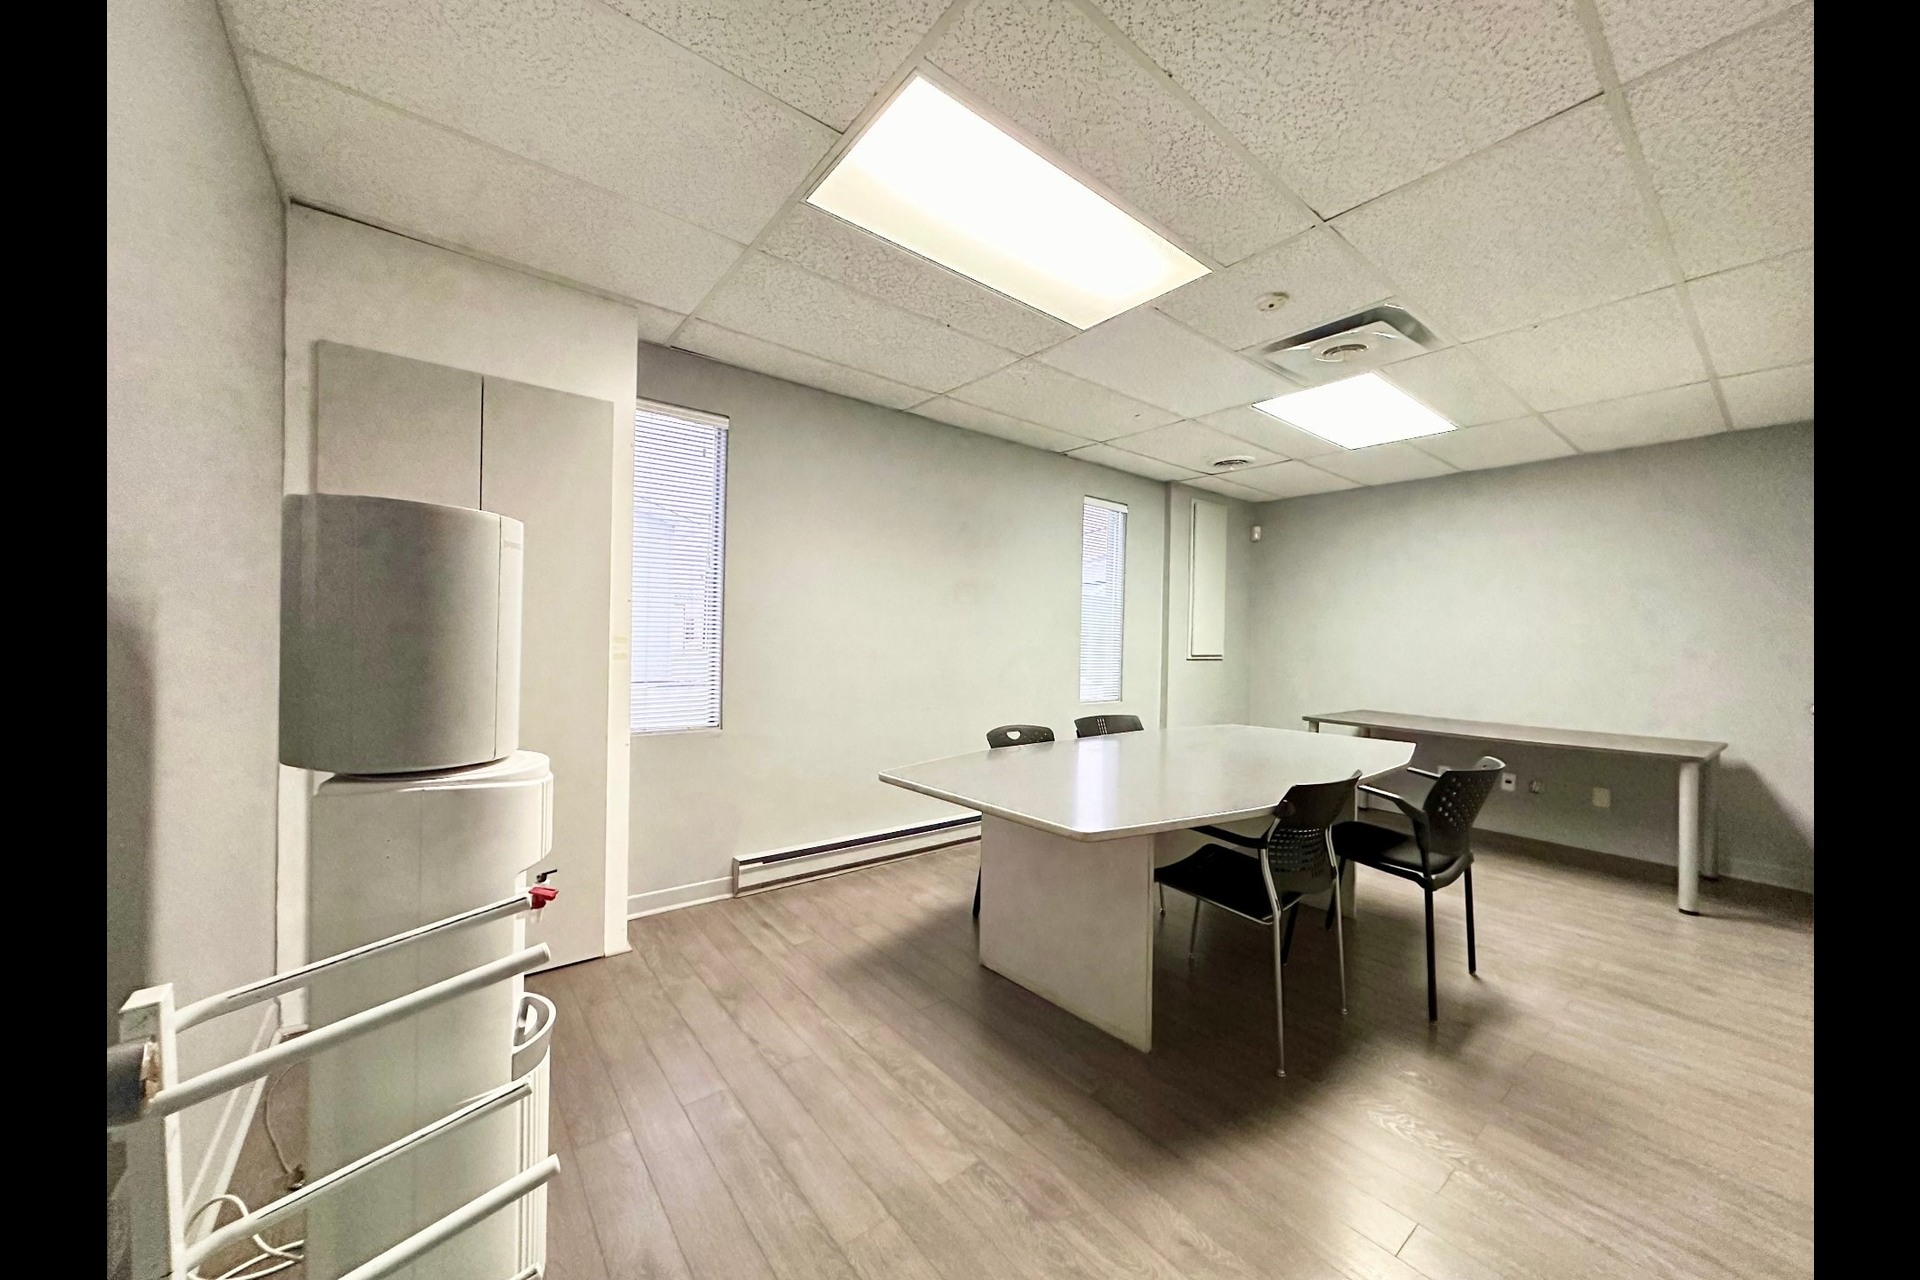 image 20 - Commercial building For rent Chicoutimi Saguenay 